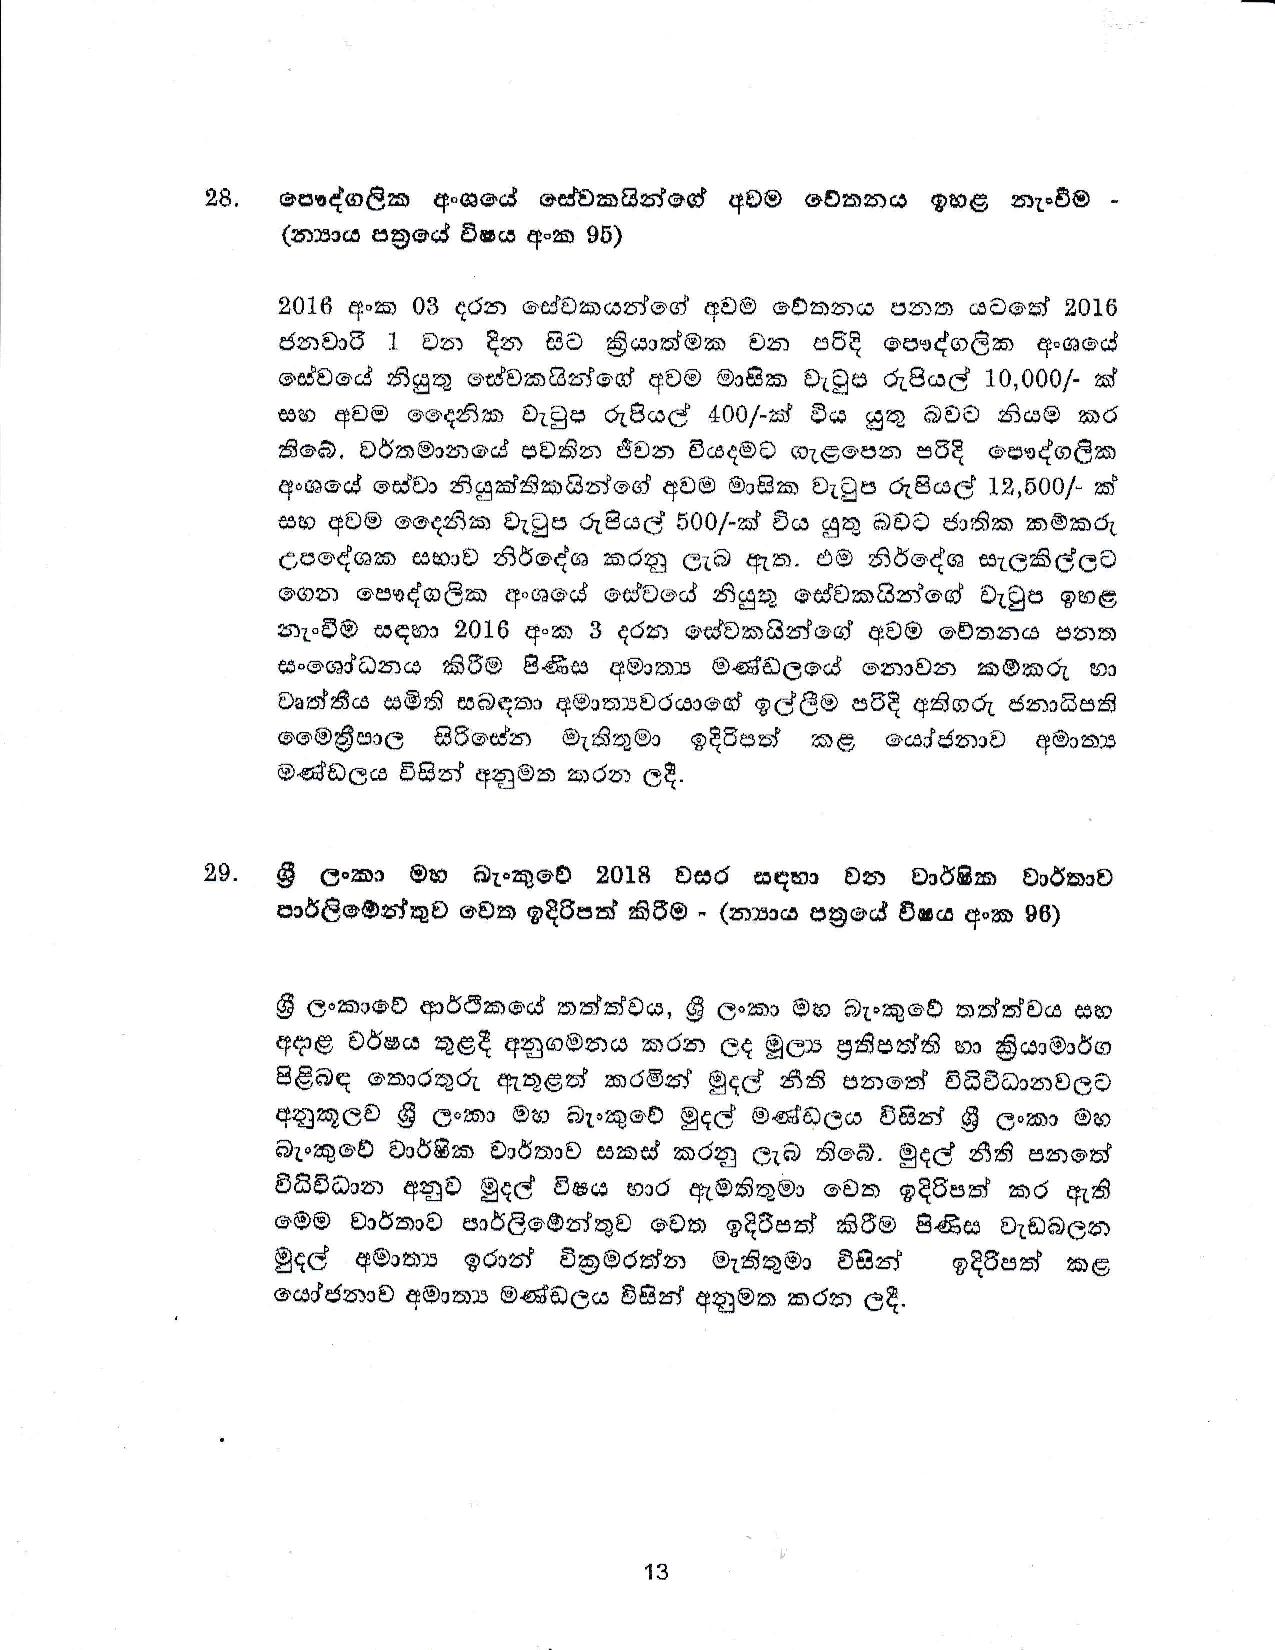 Cabinet Decision on 30.04.2019 page 013